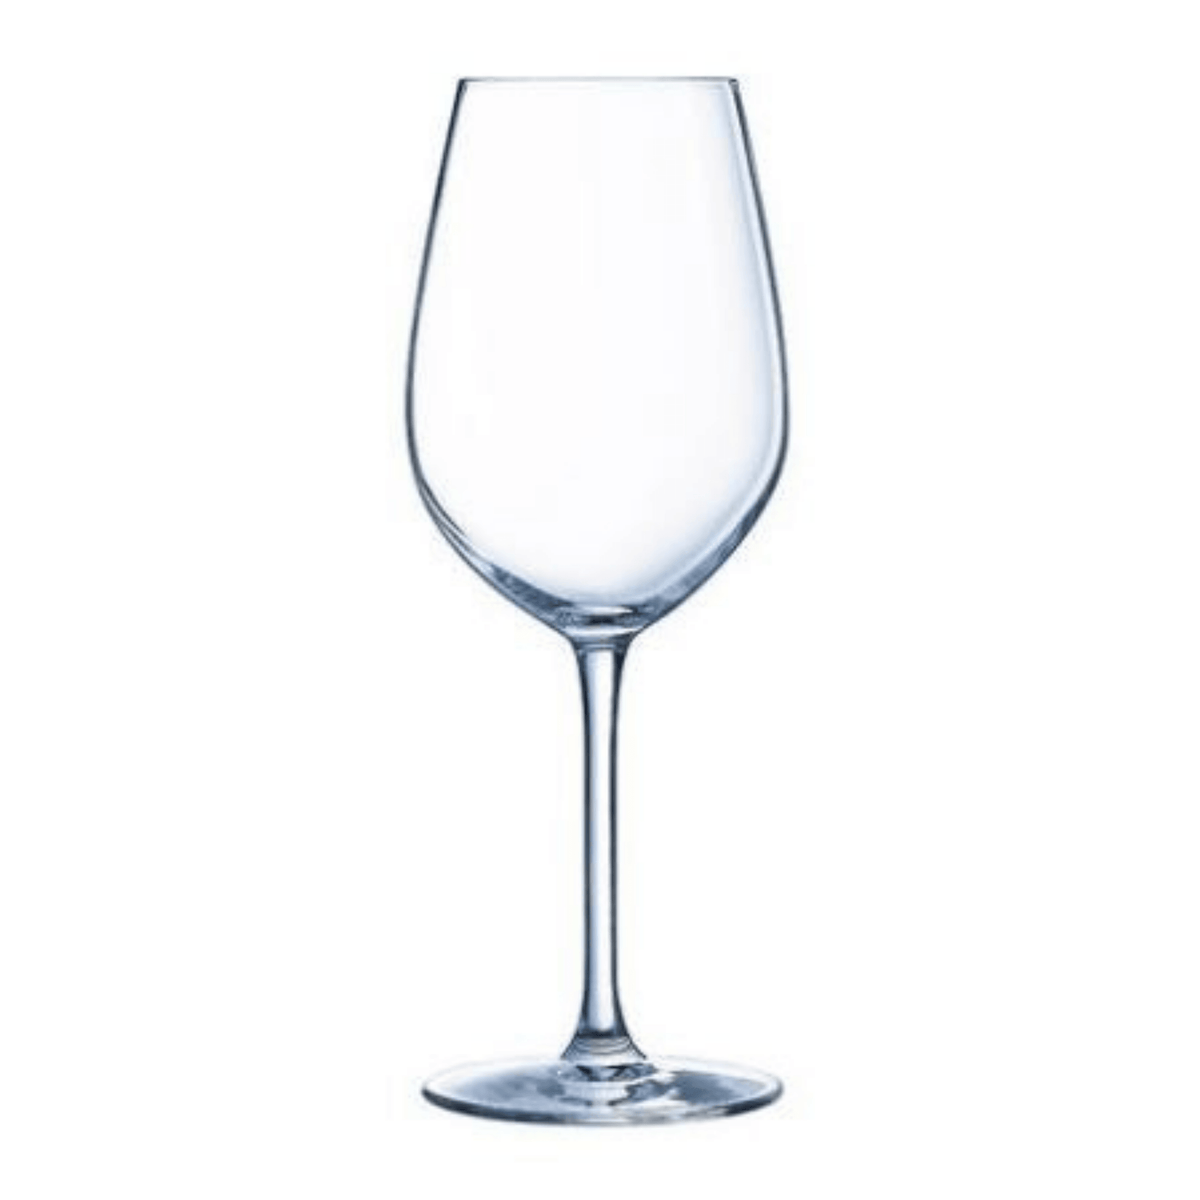 Chef & Sommelier's Sequence Wine Glass 55cl - BESPOKE77